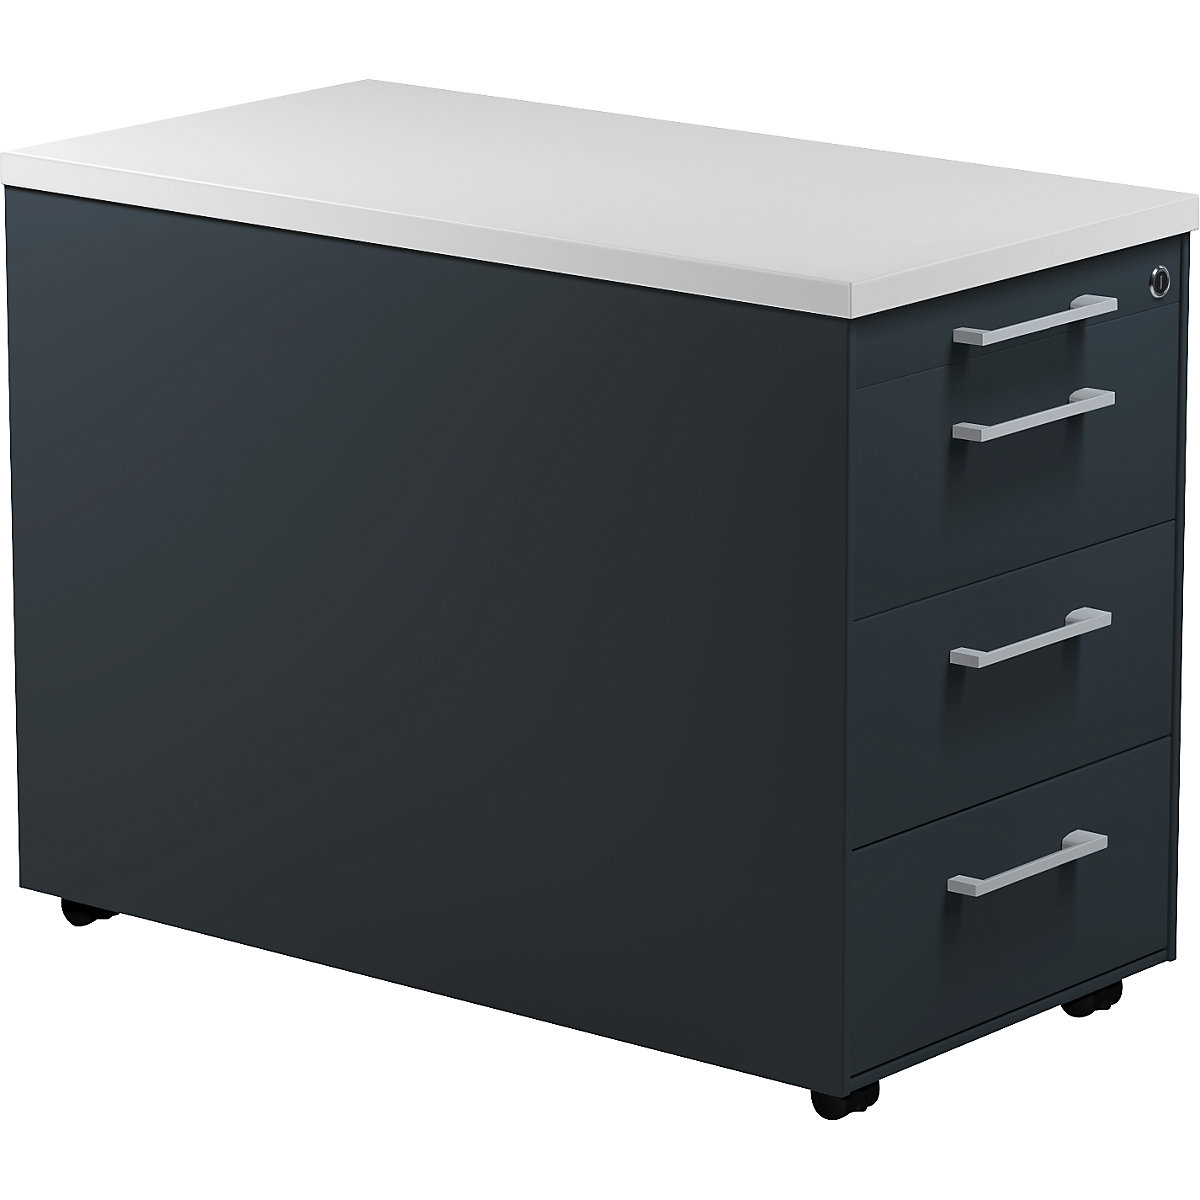 Mobile pedestal on castors – mauser, HxD 579 x 800 mm, 3 drawers, charcoal / charcoal / light grey-5